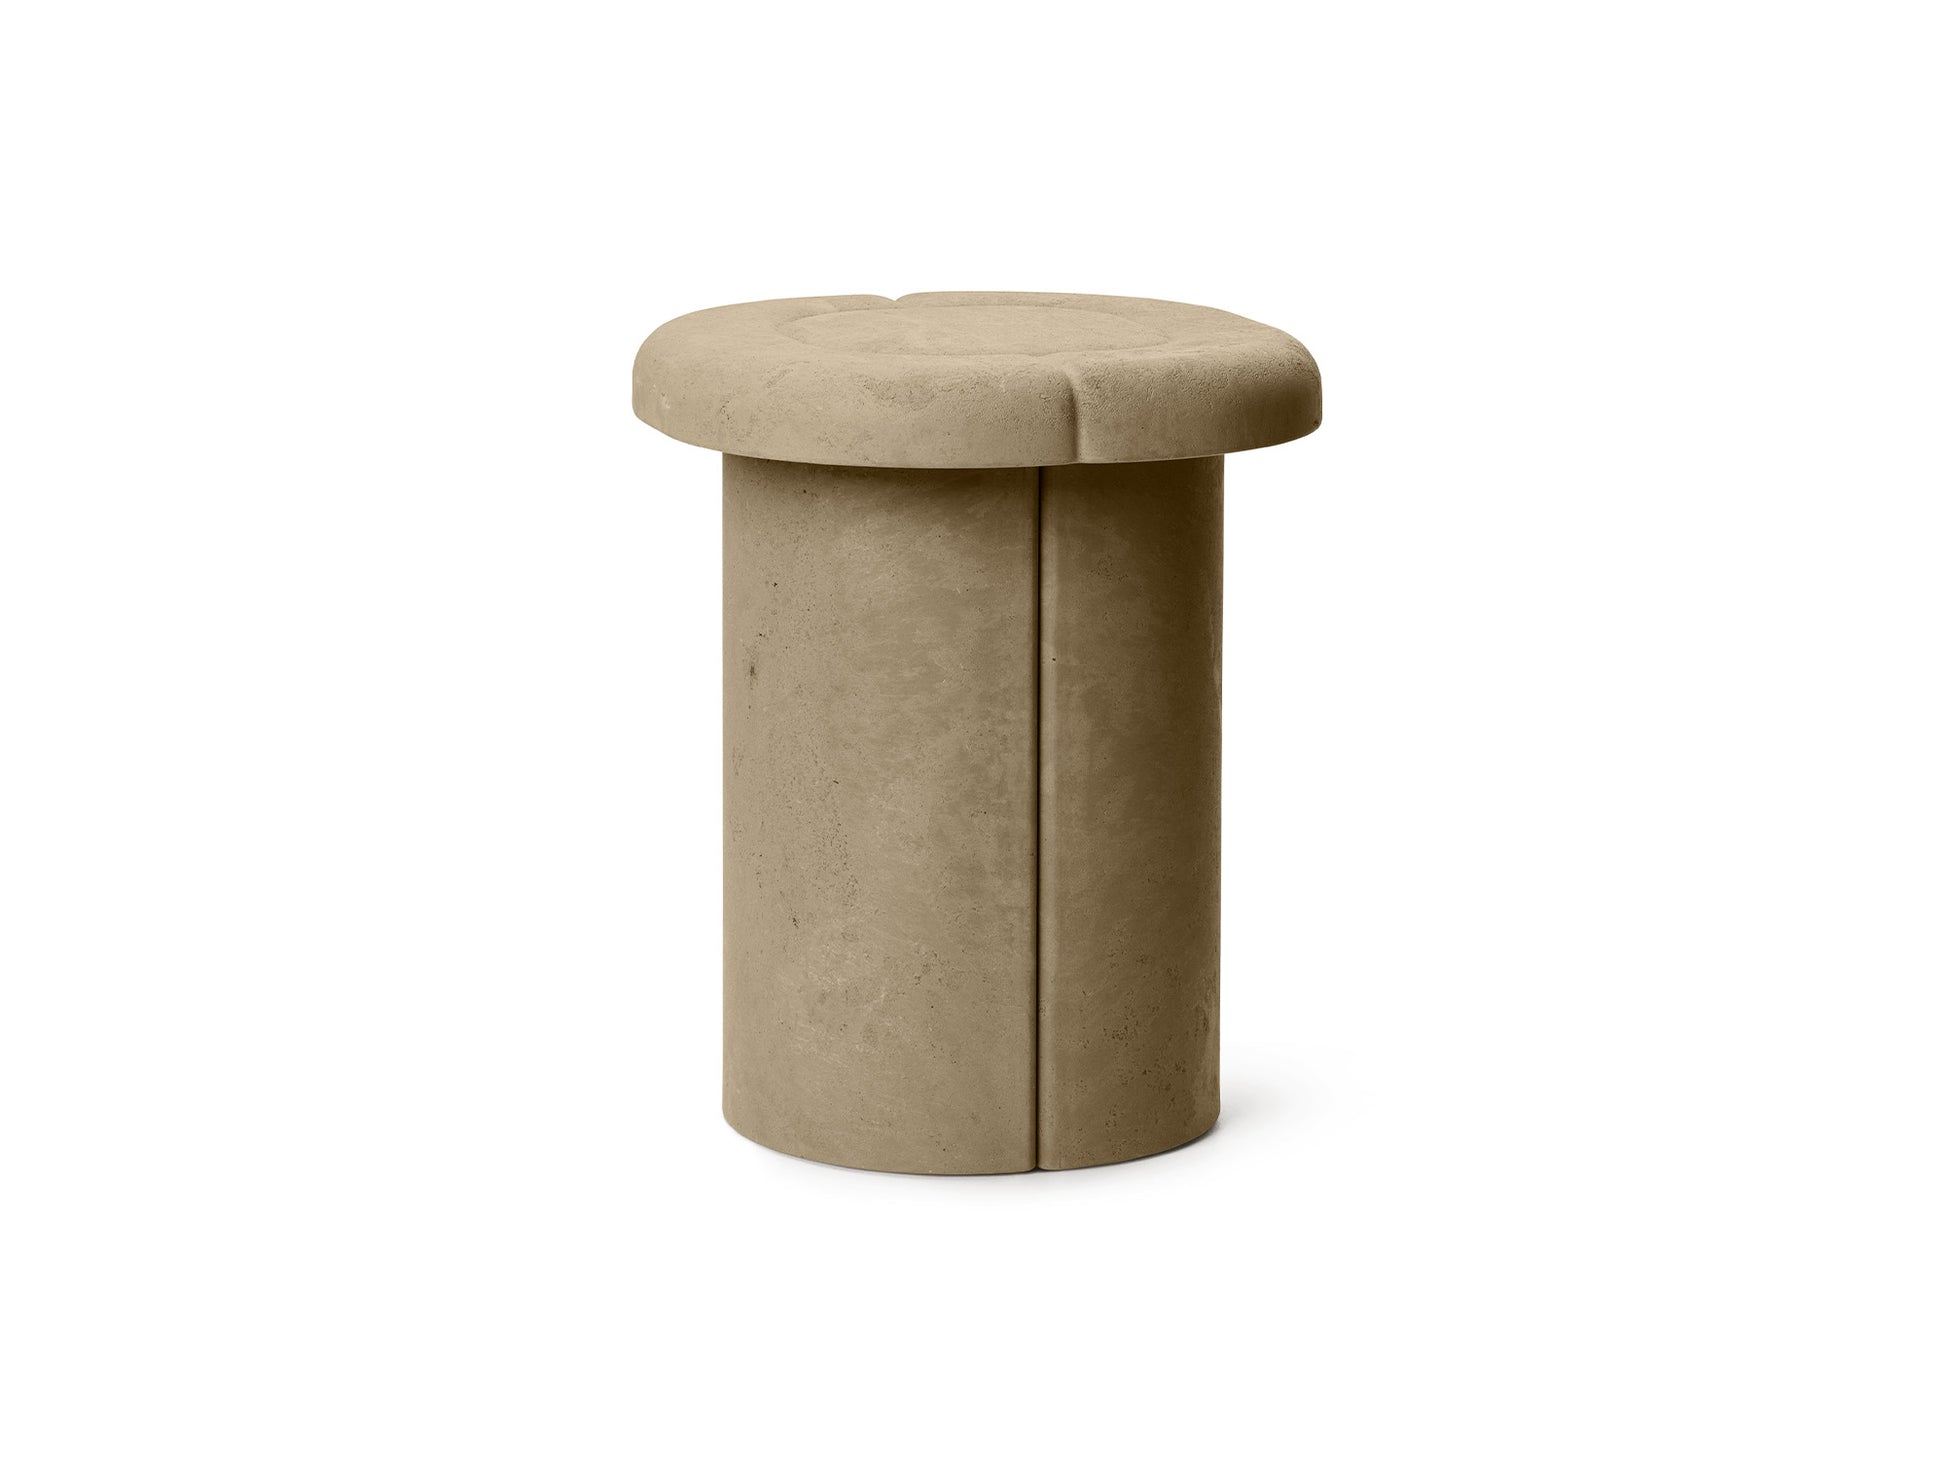 Alder Side Table by Mater - Earth Grey